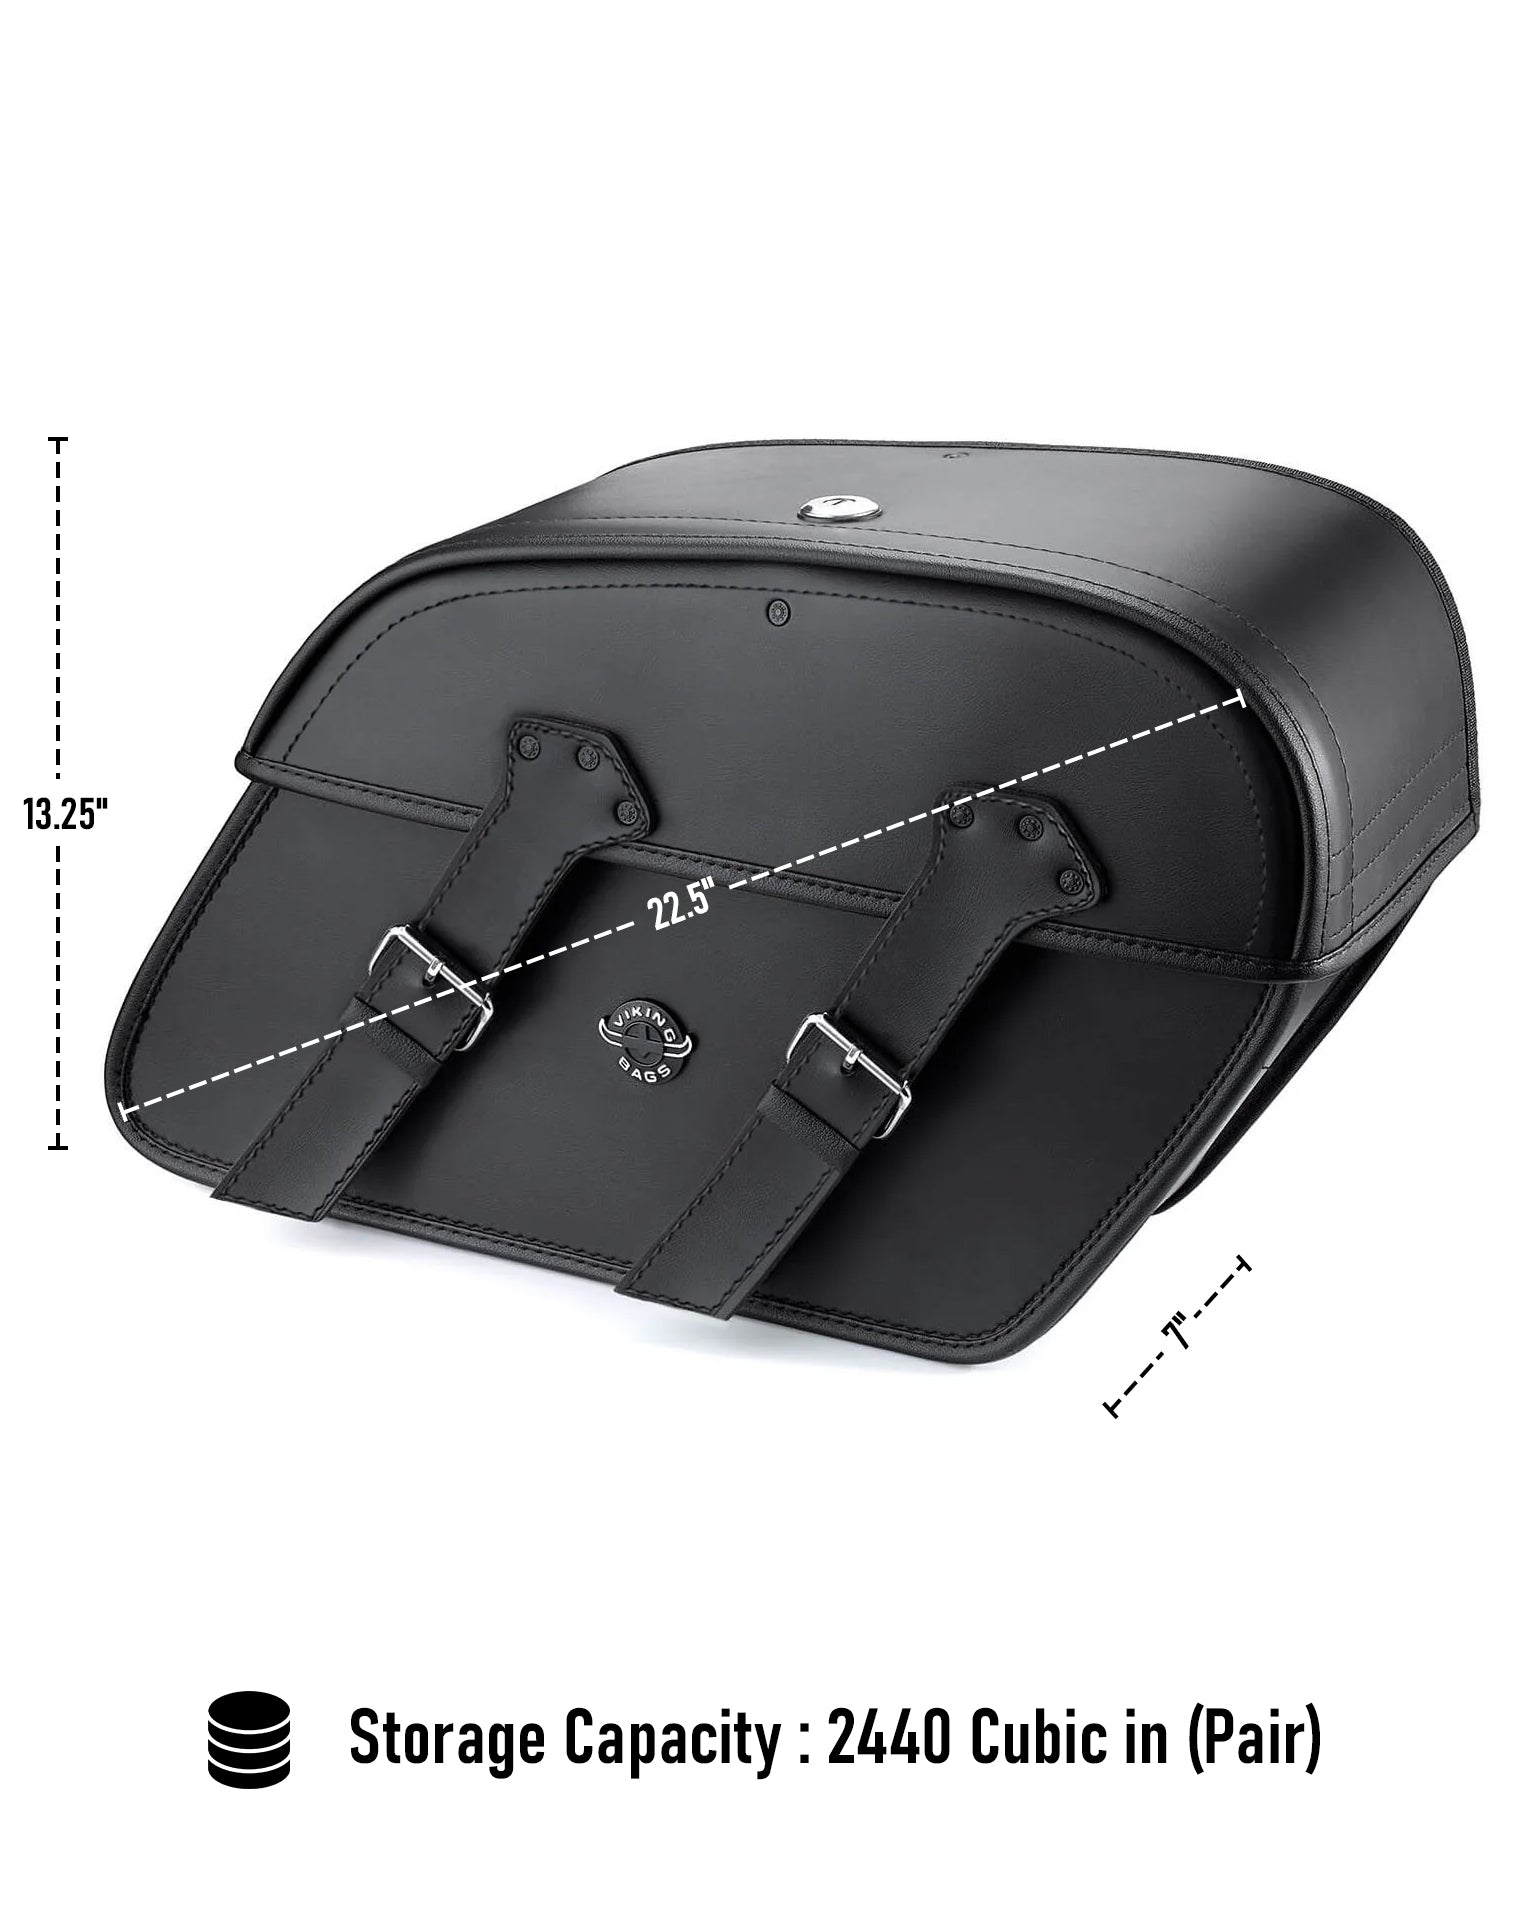 Viking Raven Extra Large Kawasaki Vulcan S Leather Motorcycle Saddlebags Can Store Your Ridings Gears